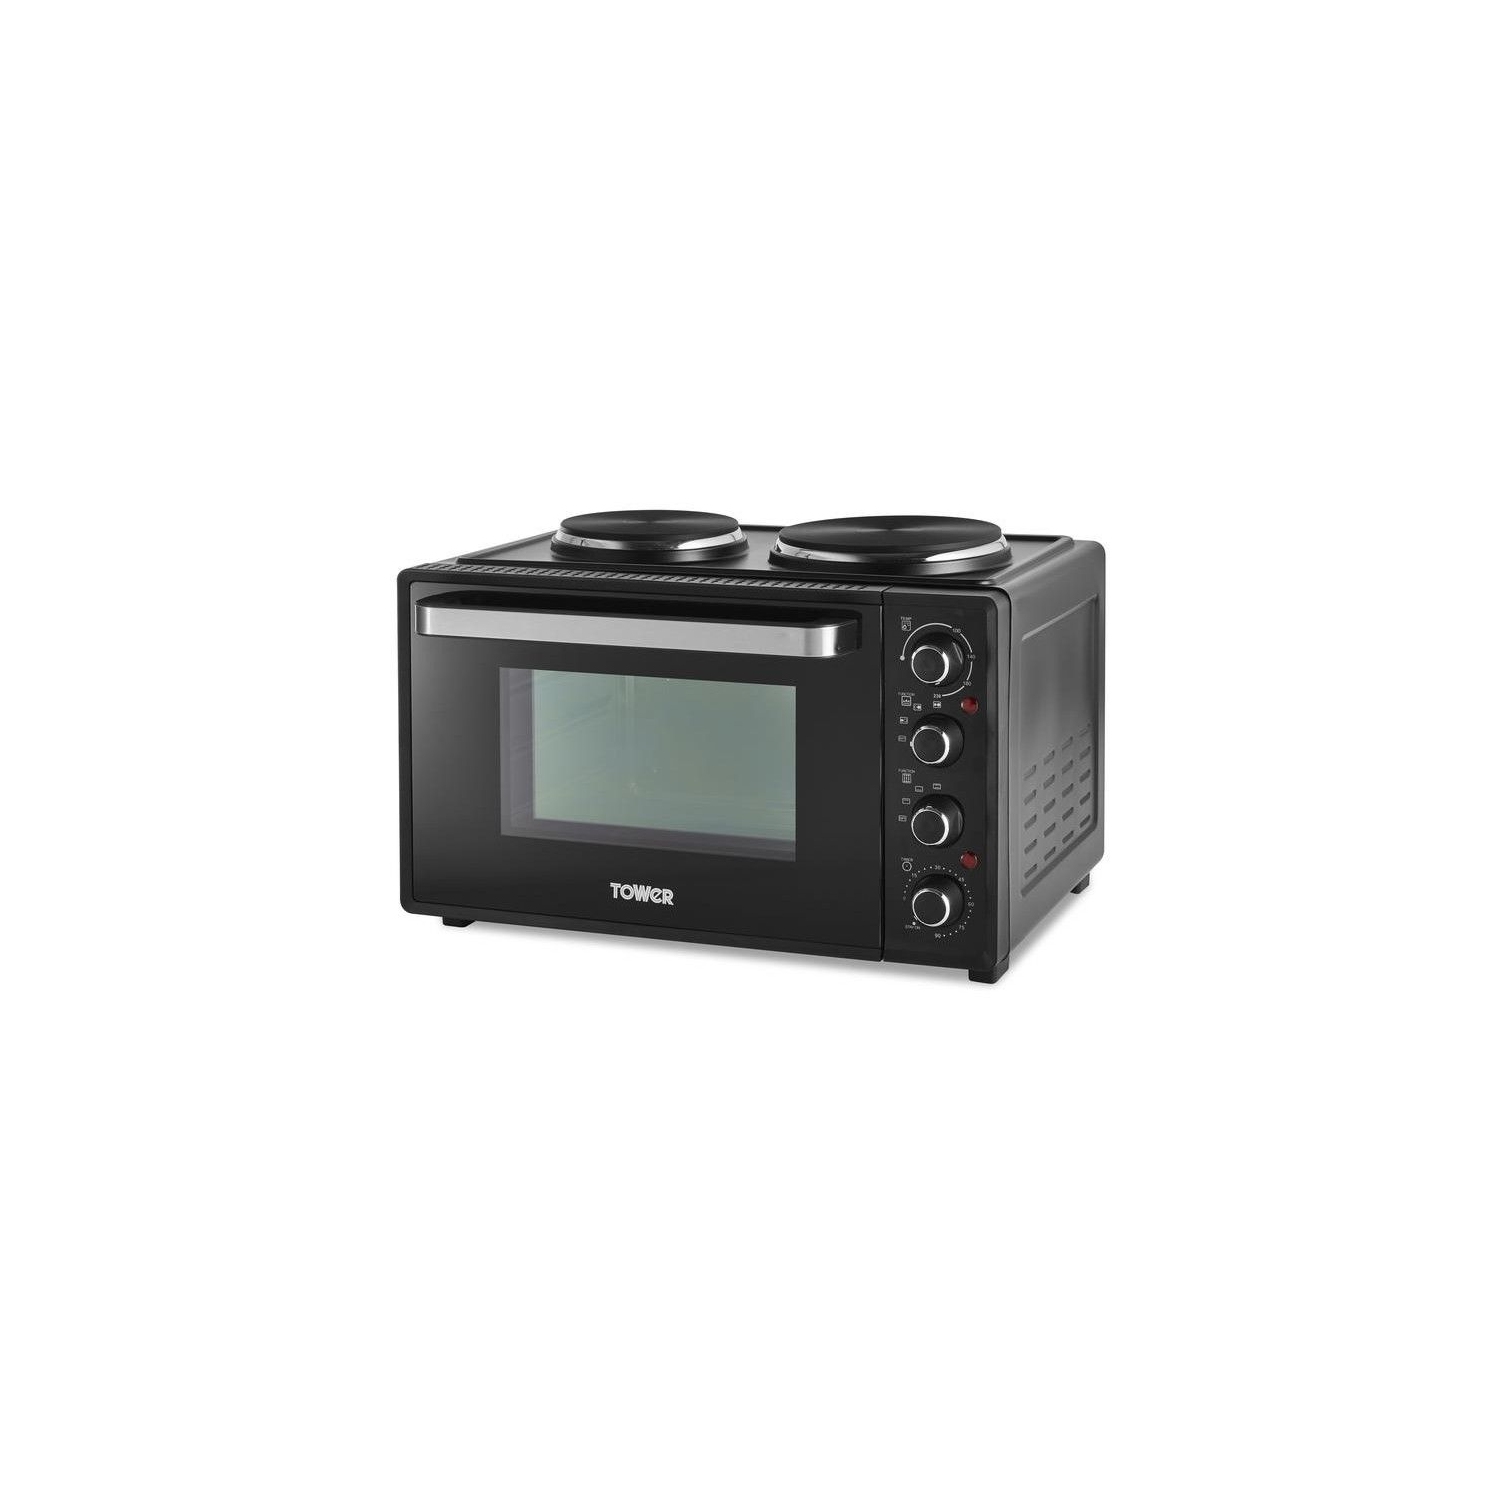 Tower Table Top Mini Oven with Hotplates - Black - 0